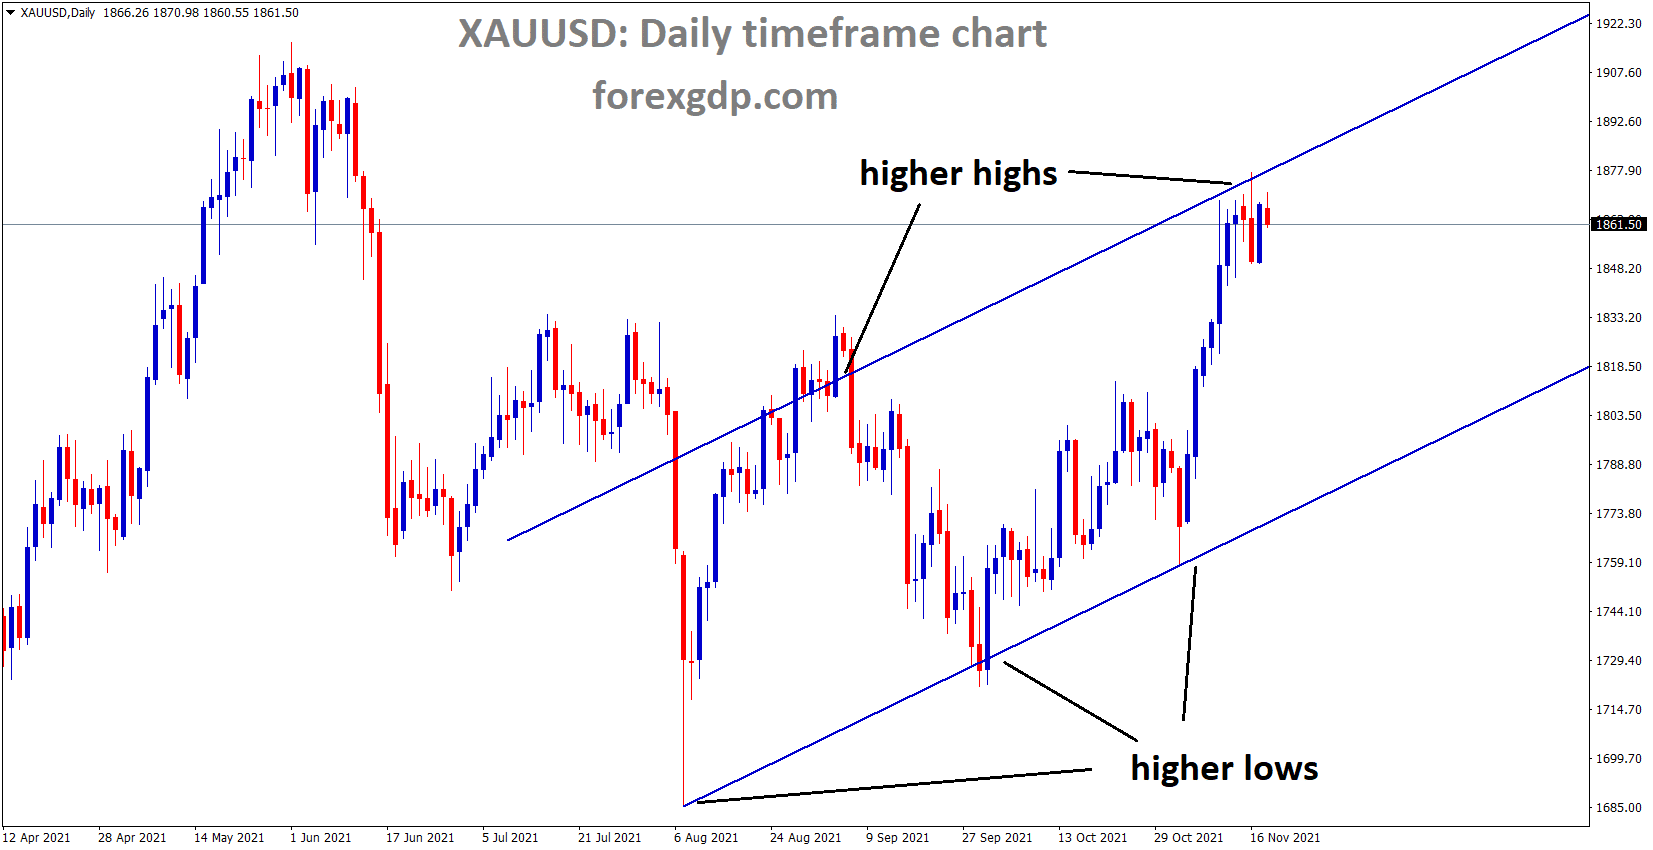 XAUUSD Gold price has reached the Higher high area of the channel and the market gets consolidation at the top of the channel